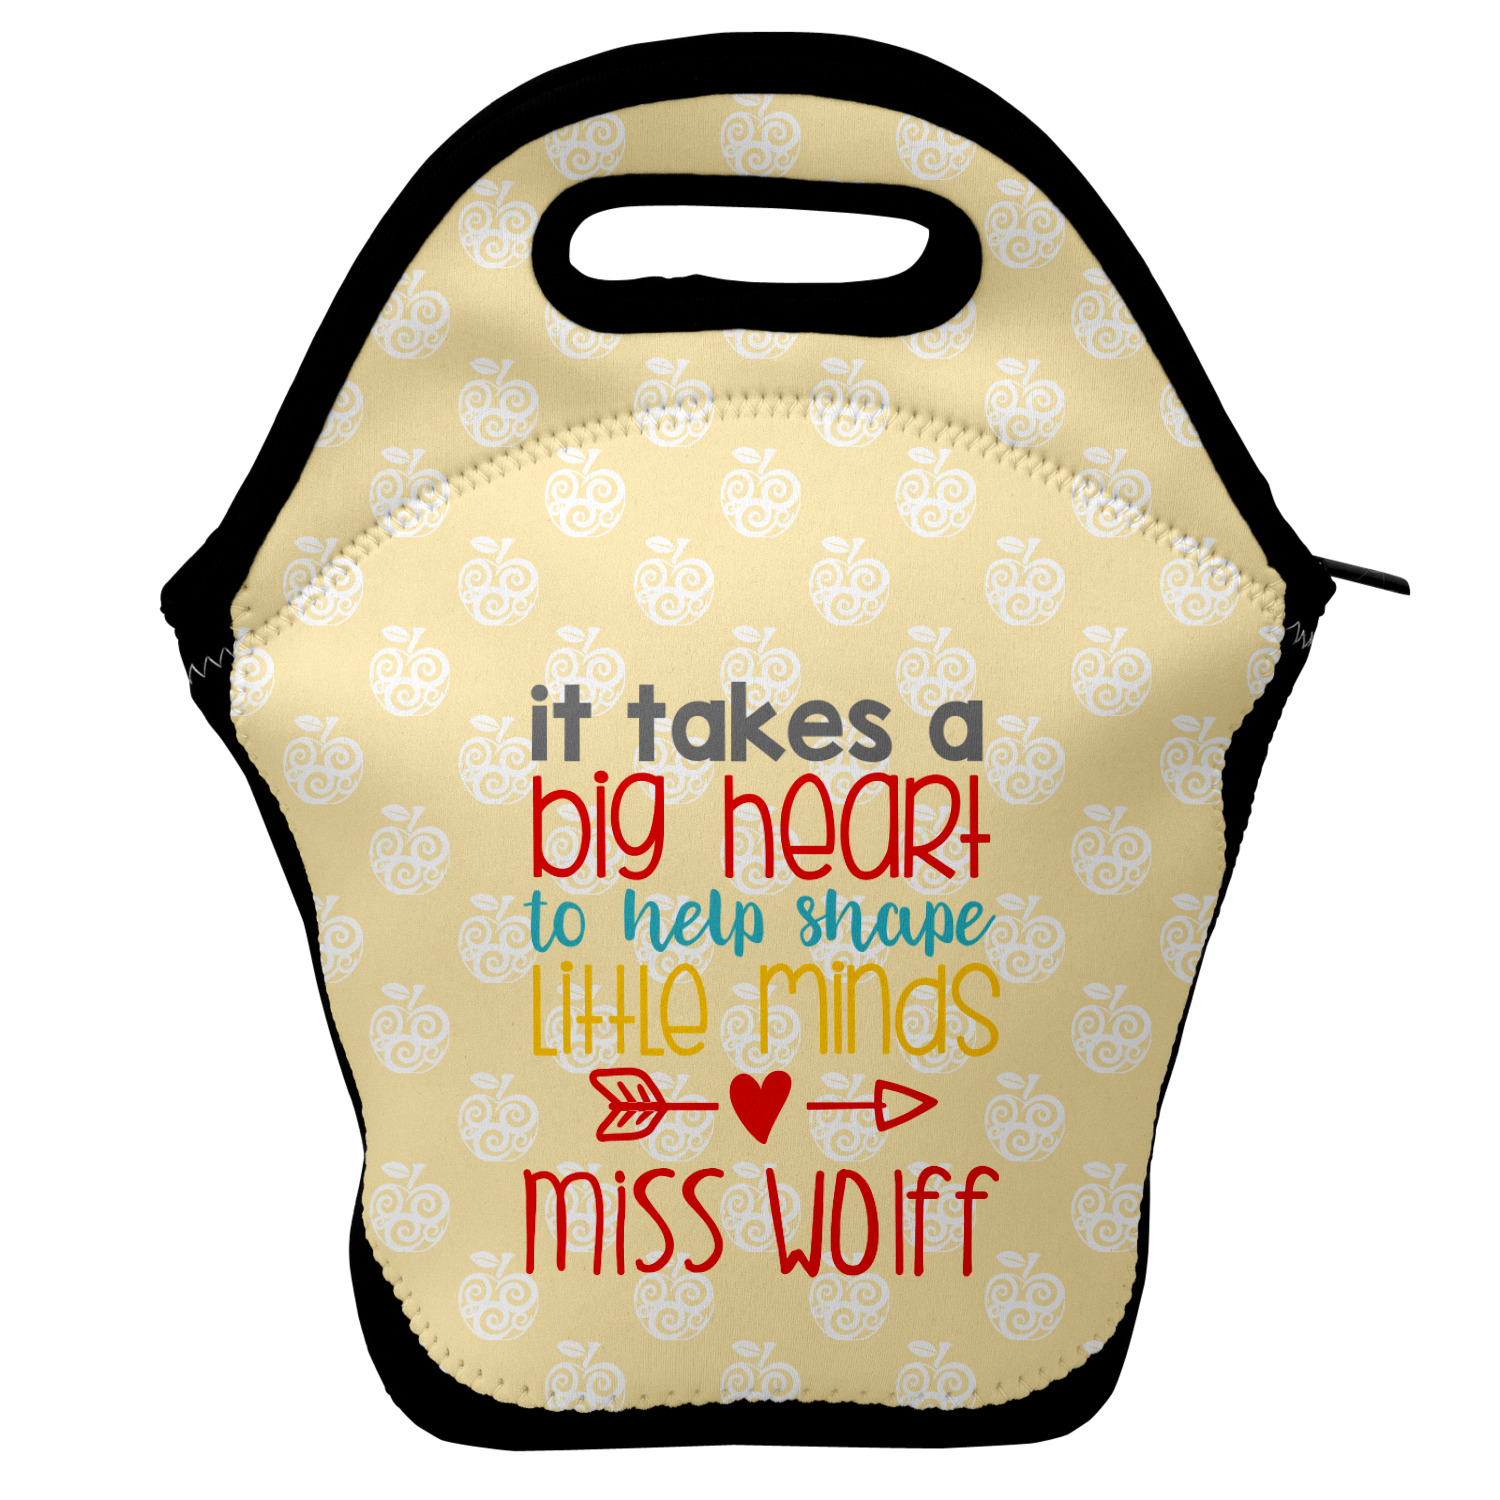 https://www.youcustomizeit.com/common/MAKE/1038343/Teacher-Quotes-and-Sayings-Lunch-Bag-Front.jpg?lm=1566251251